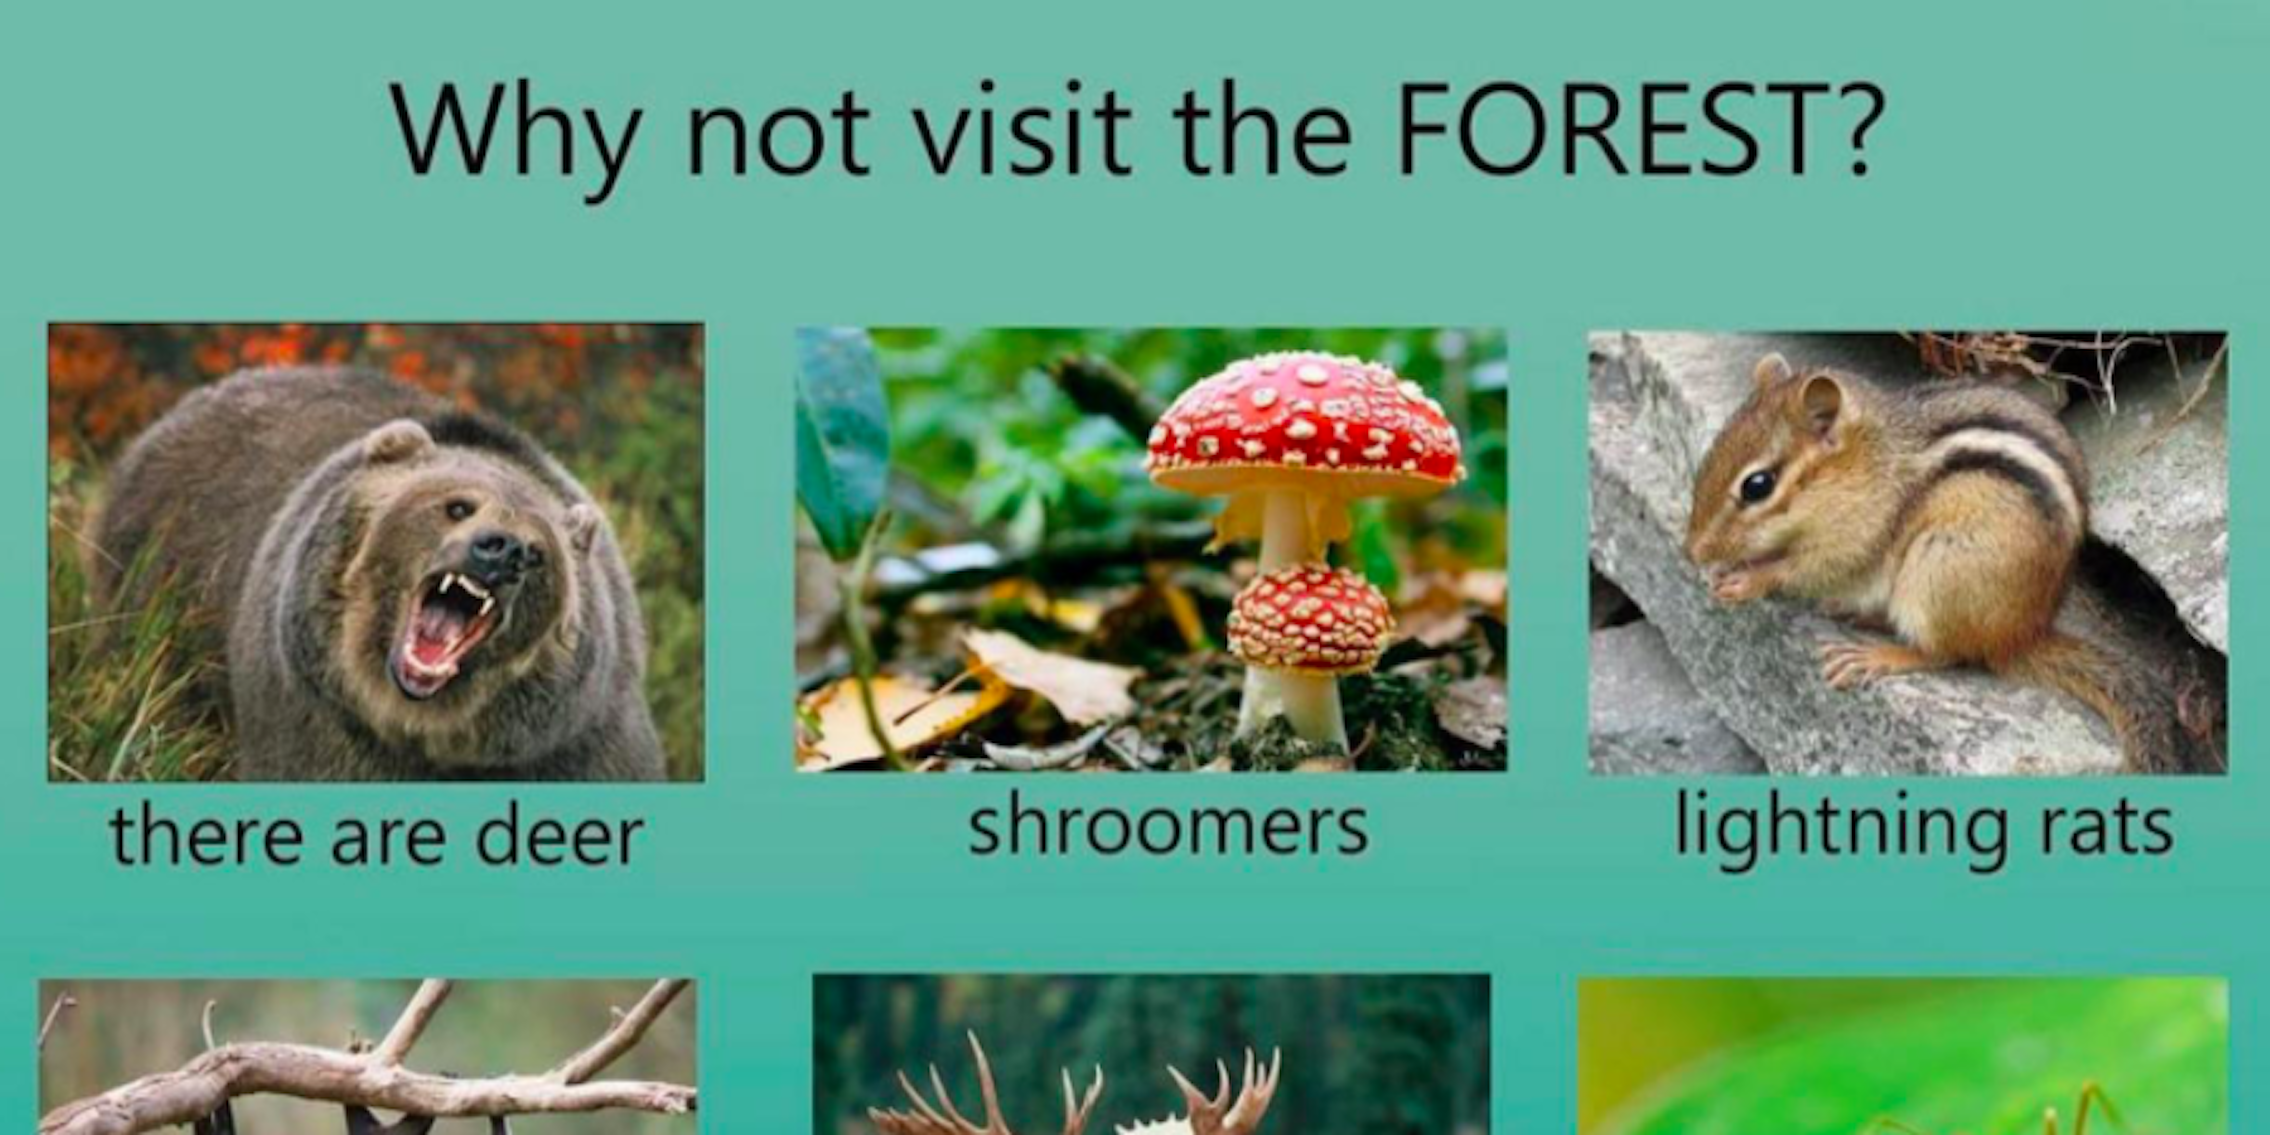 why not visit meme: forest animals described with weird names